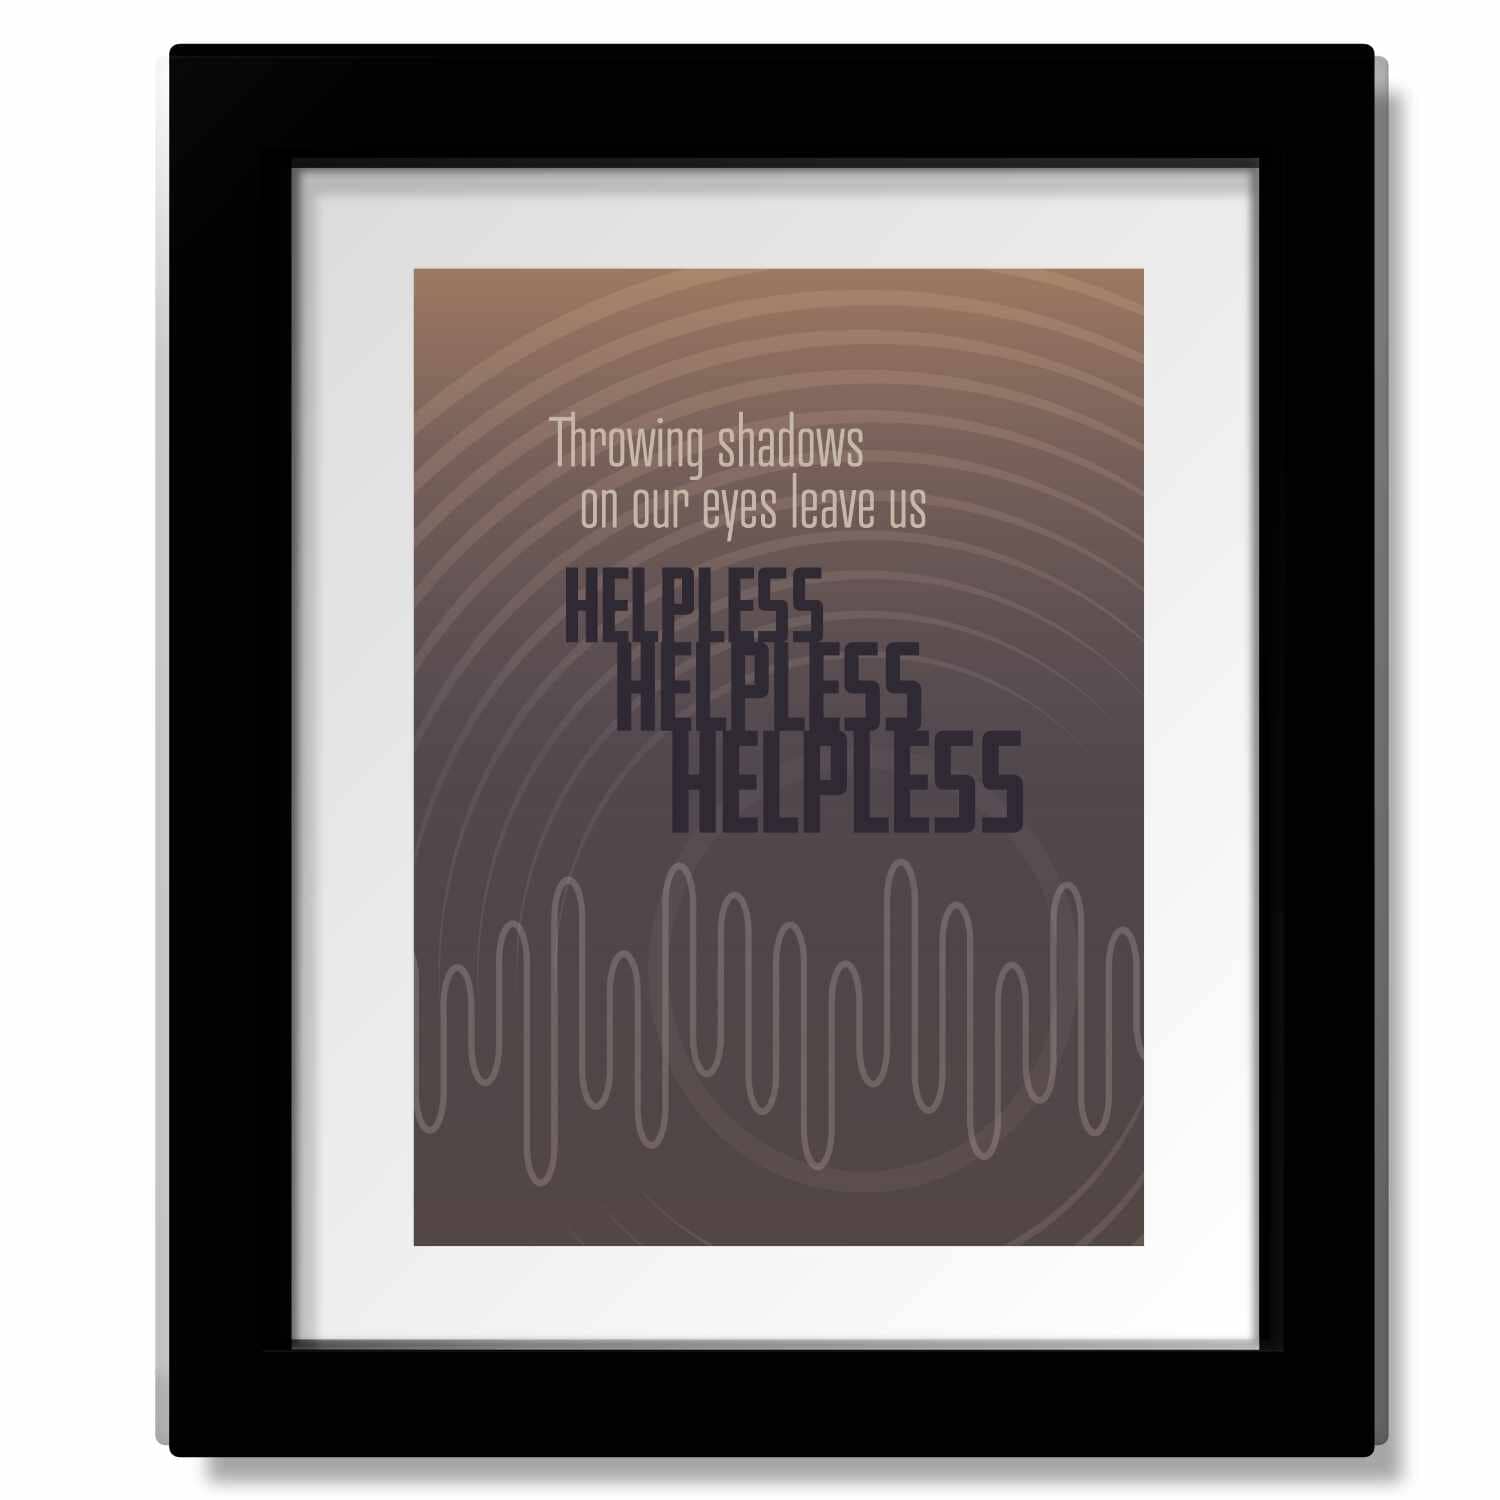 Helpless by Neil Young - Music Gift Song Lyric Wall Decor Song Lyrics Art Song Lyrics Art 8x10 Matted and Framed Print 